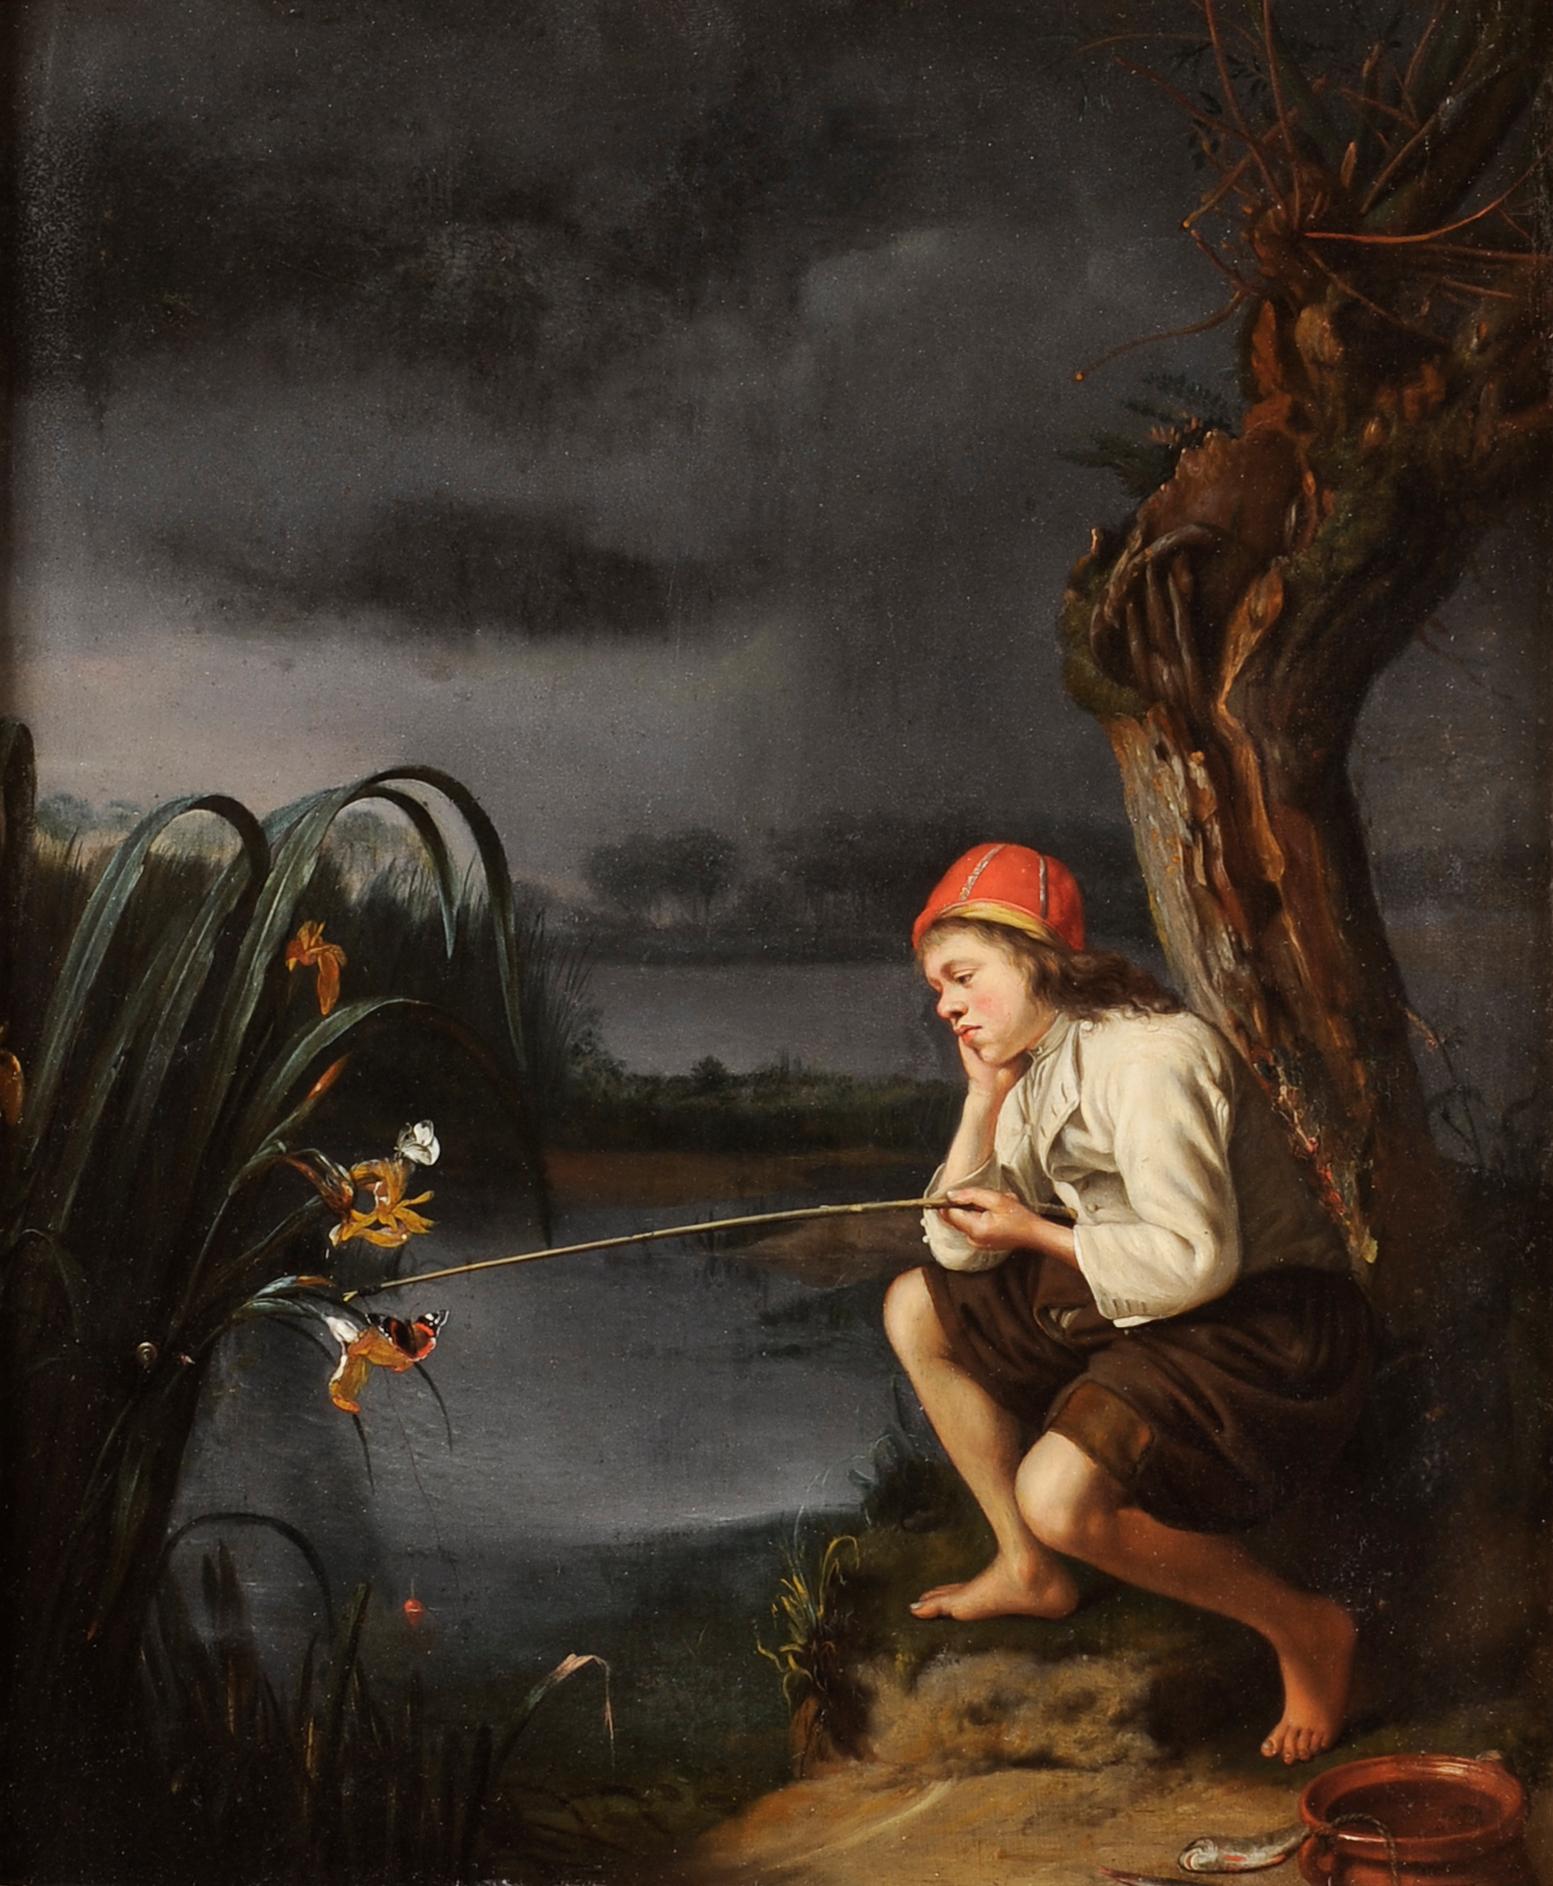 Young fisher - Phlegmatism allegory - Painting by Godfried Schalken